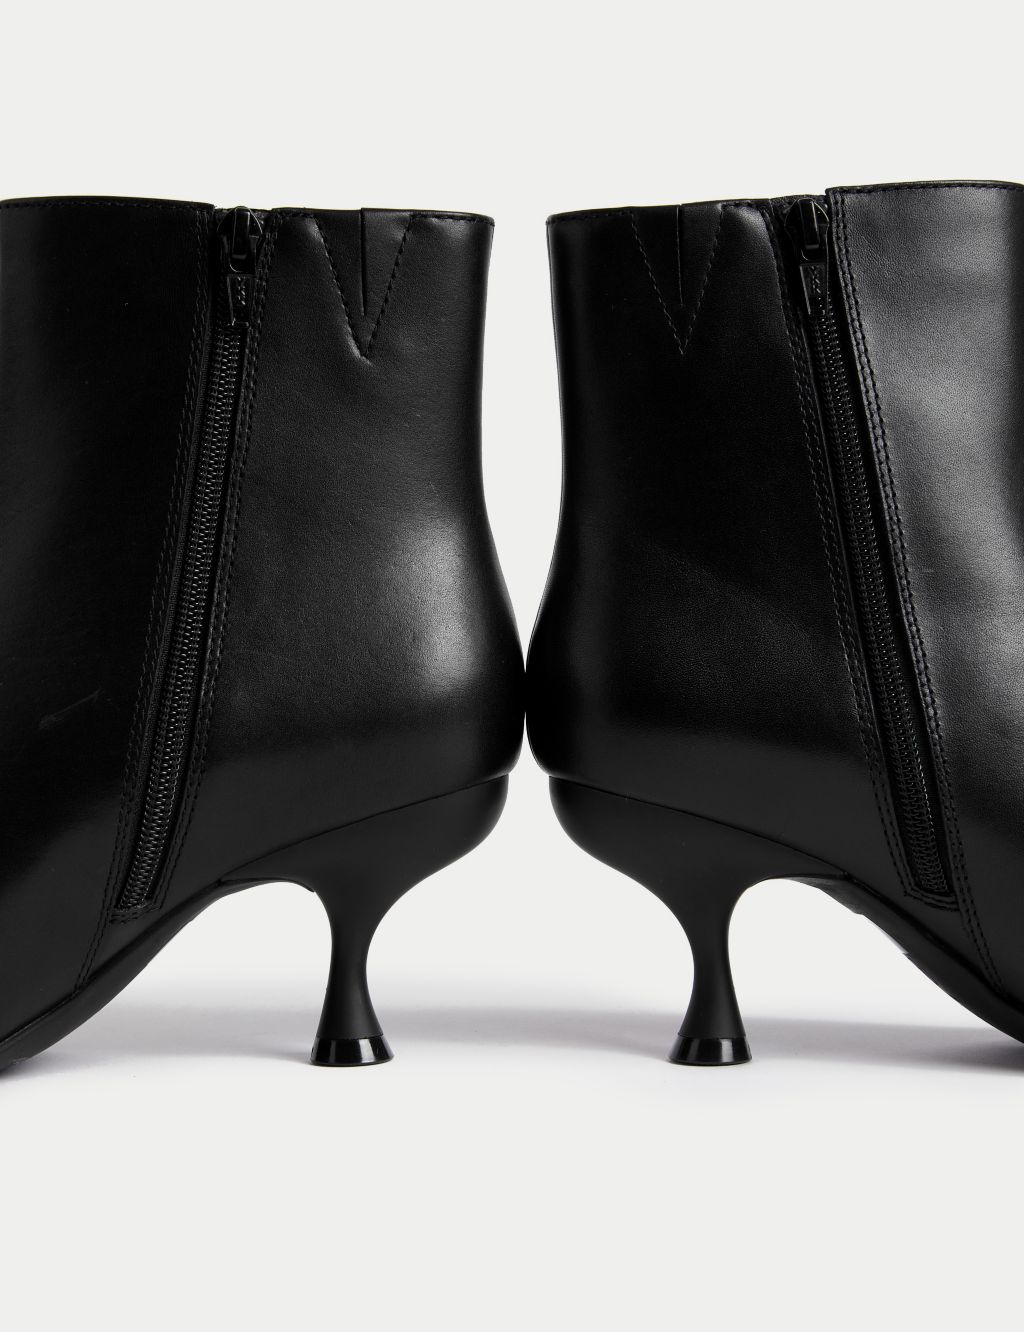 Wide Fit Leather Kitten Heel Ankle Boots image 3